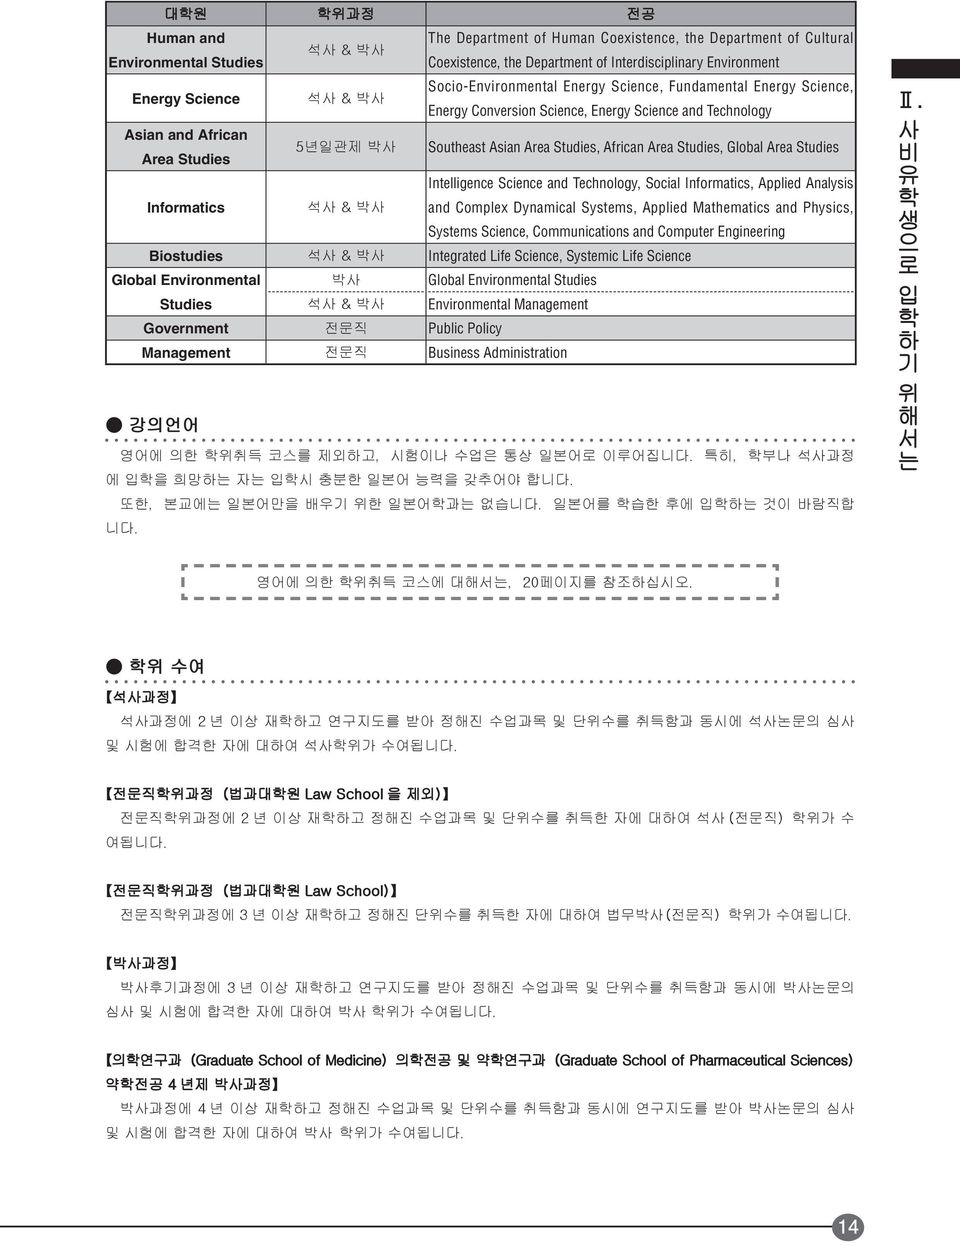 African Area Studies, Global Area Studies Informatics 석사 & 박사 Intelligence Science and Technology, Social Informatics, Applied Analysis and Complex Dynamical Systems, Applied Mathematics and Physics,